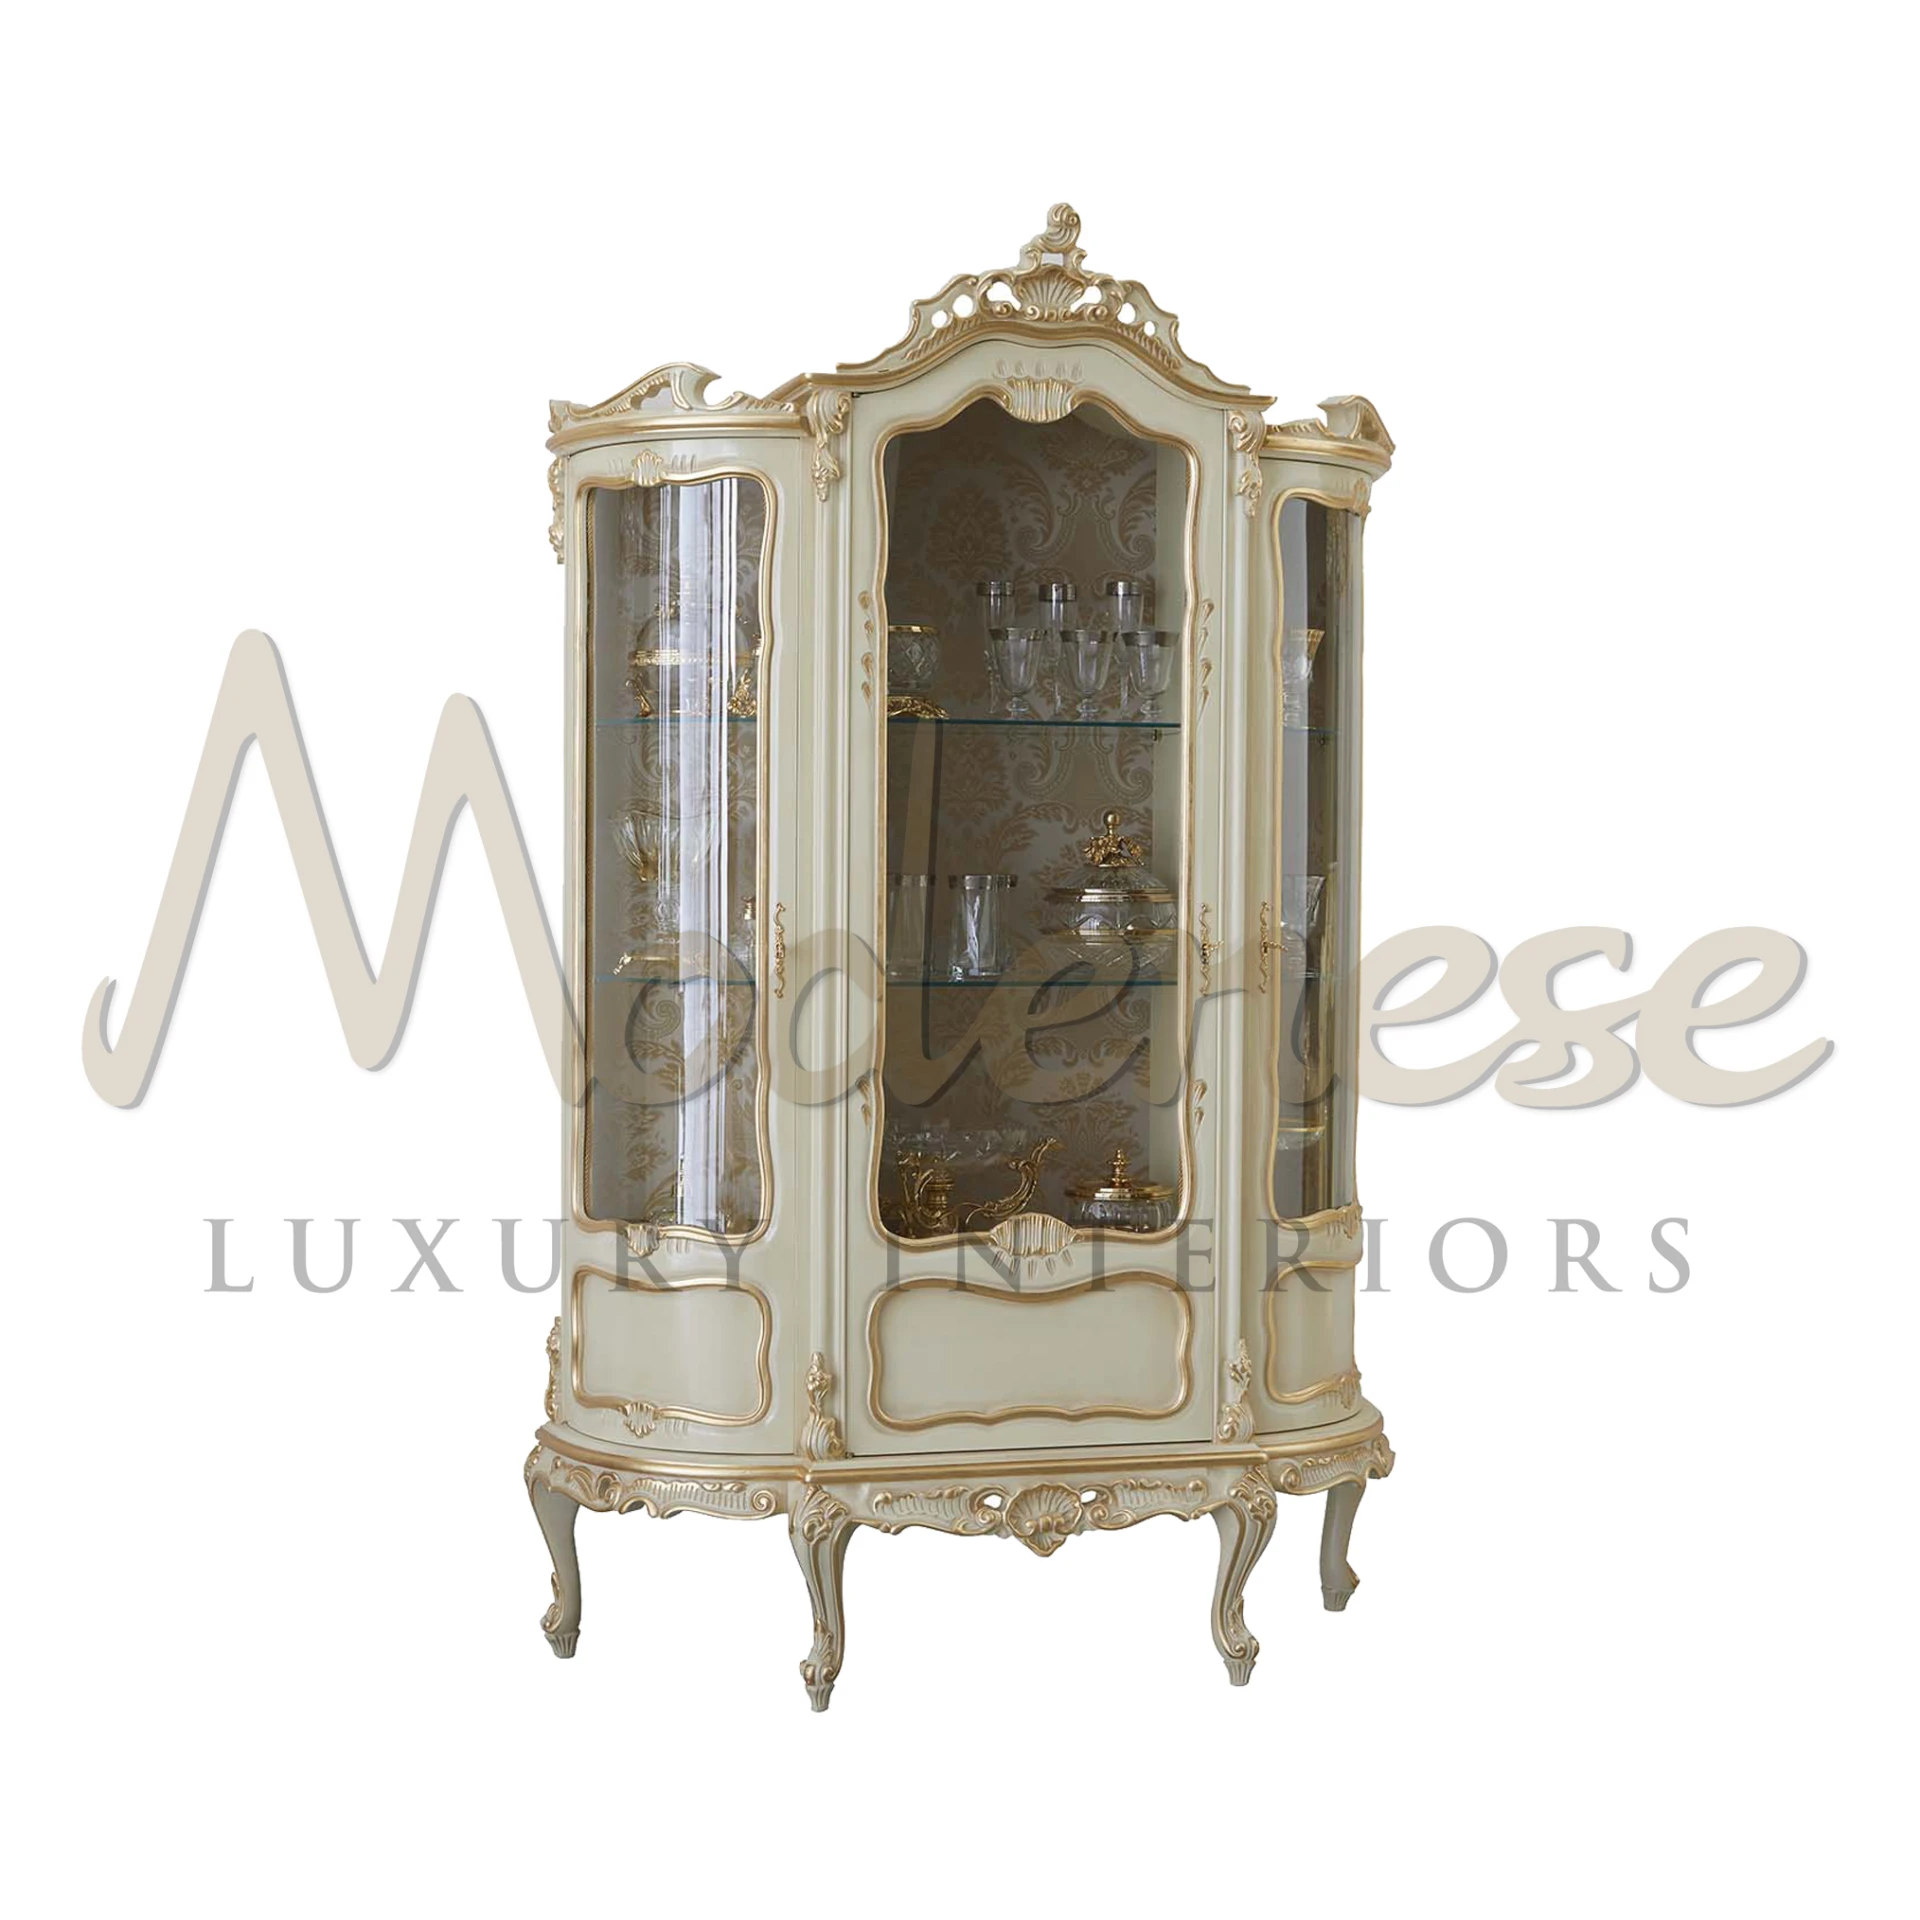 Luxurious Italian Walnut 3-doors glass cabinet with gold detailing and curved legs